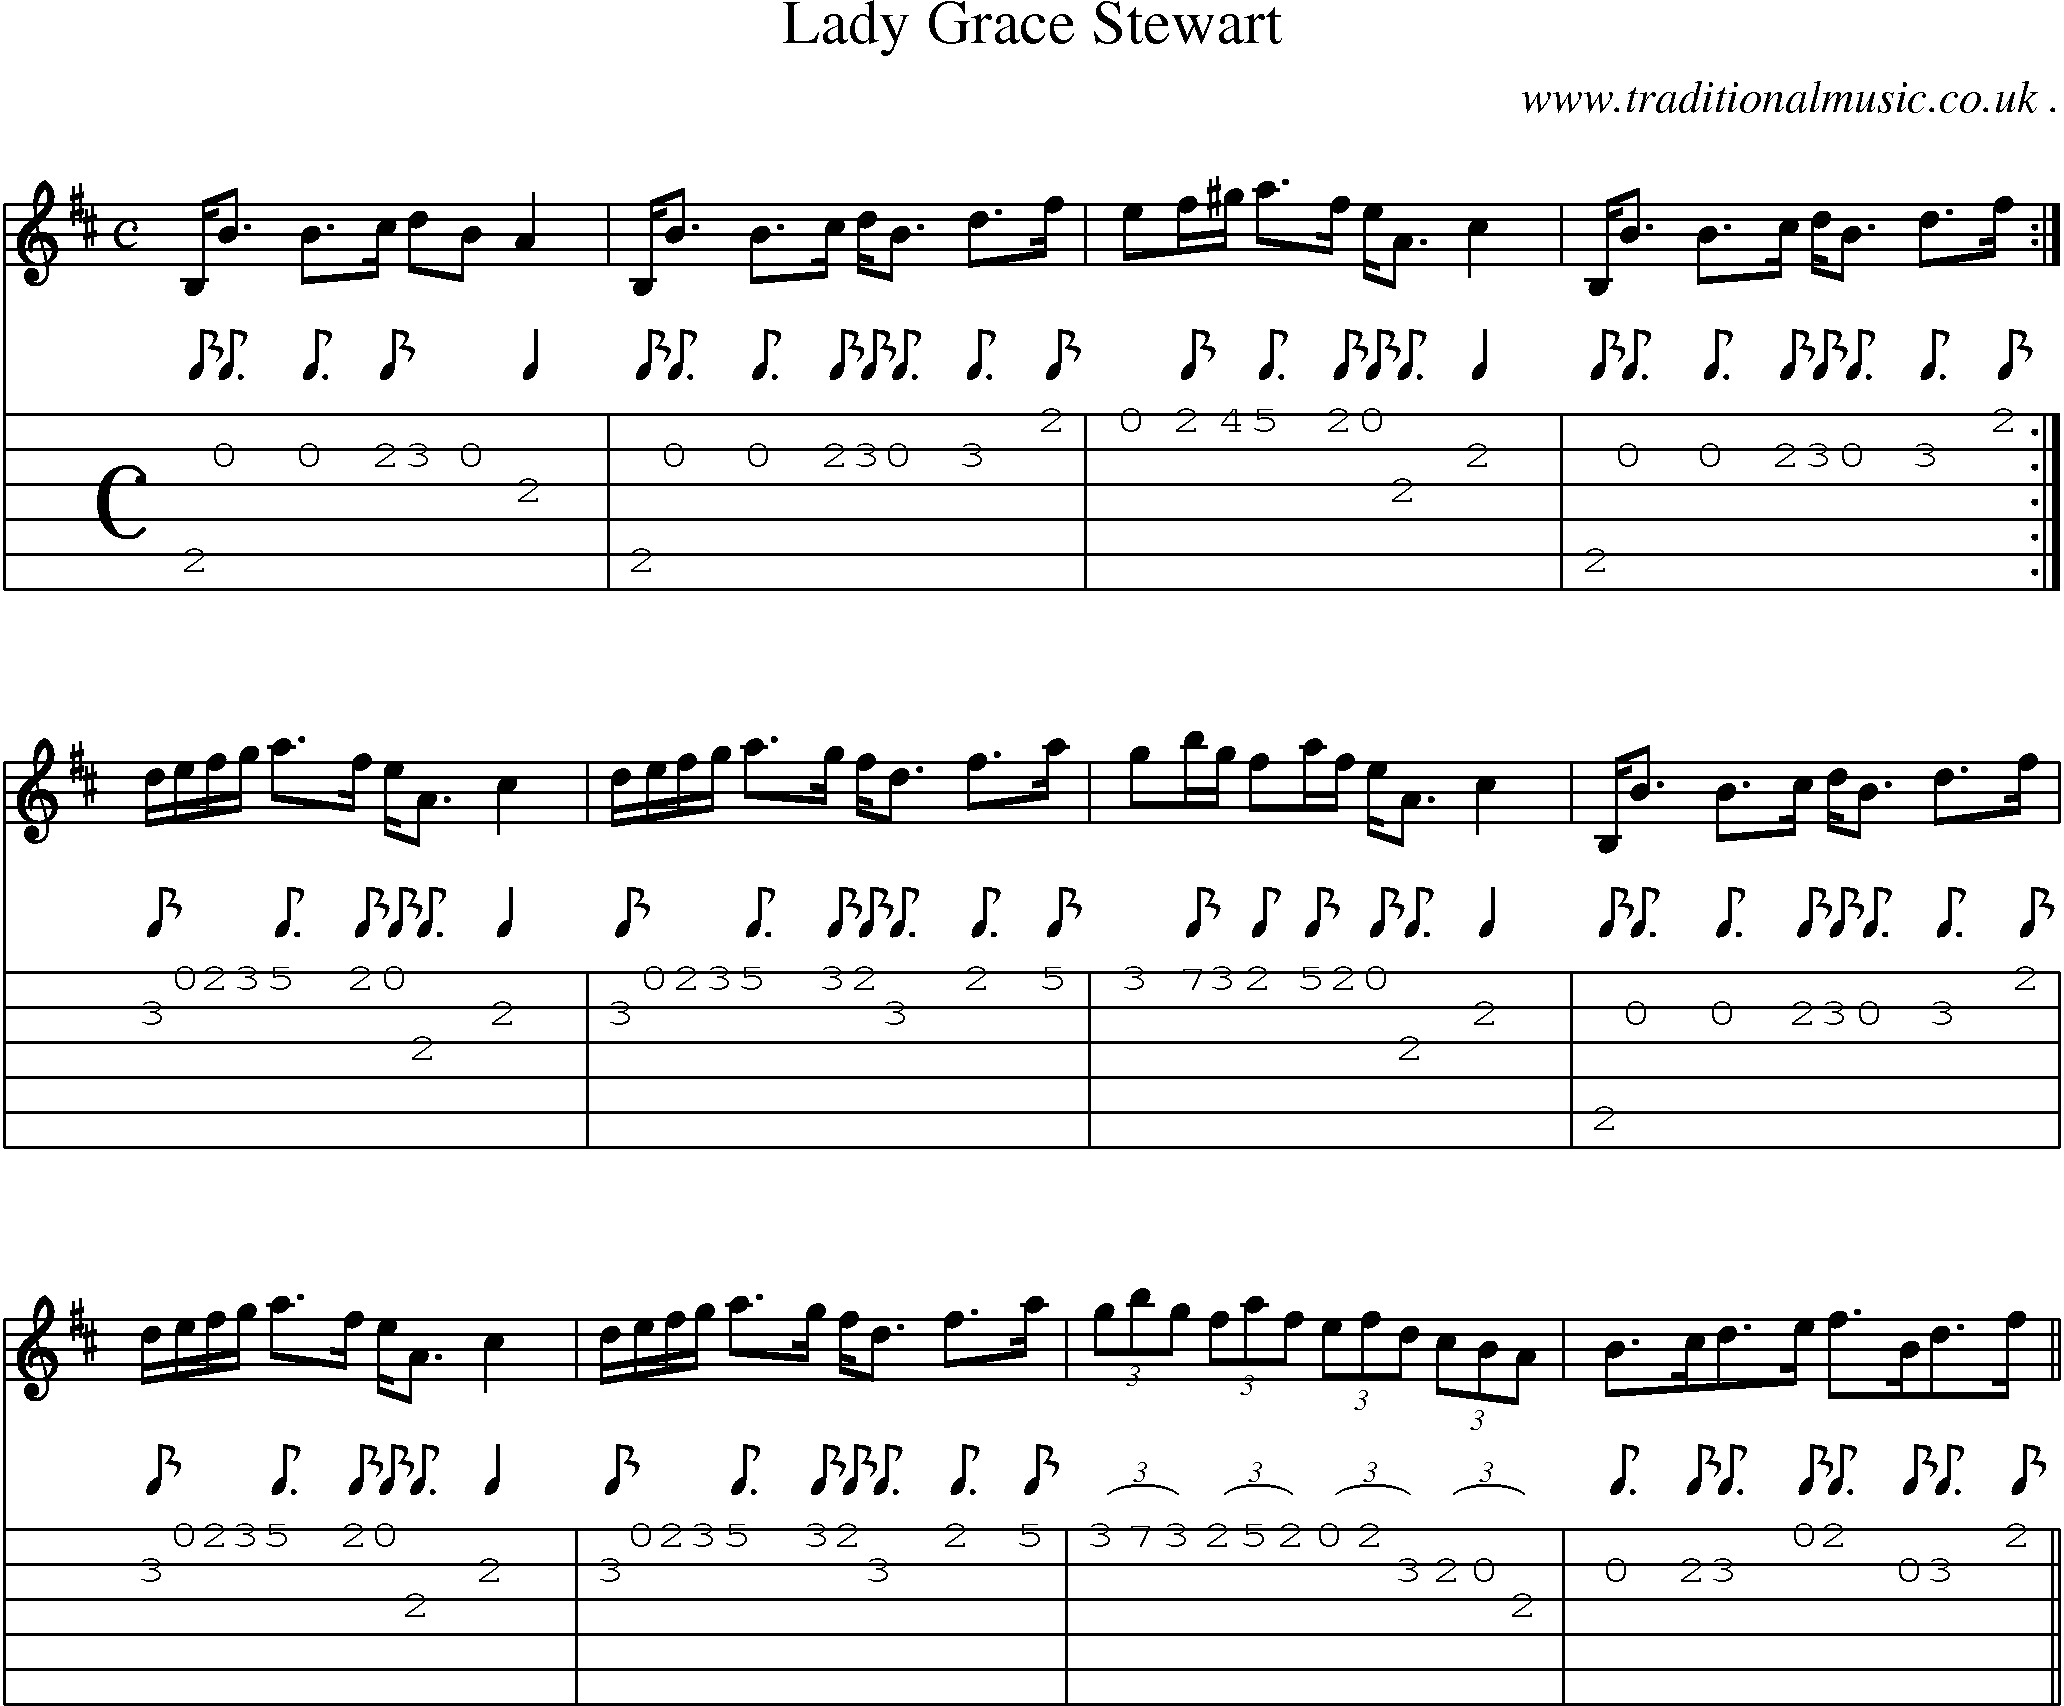 Sheet-music  score, Chords and Guitar Tabs for Lady Grace Stewart